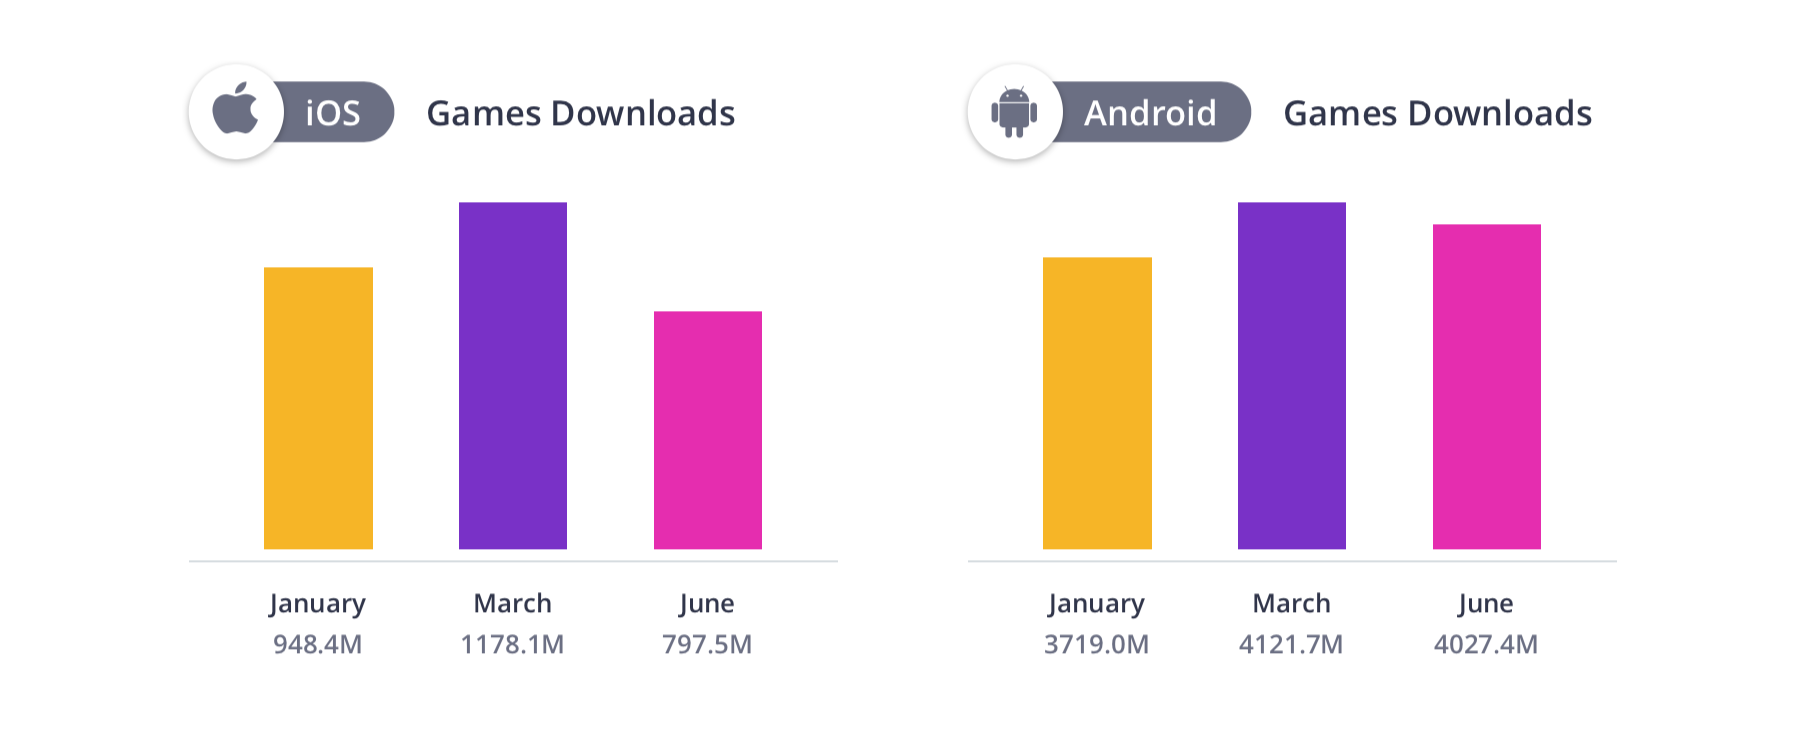 Top Mobile Games Worldwide for January 2020 by Downloads